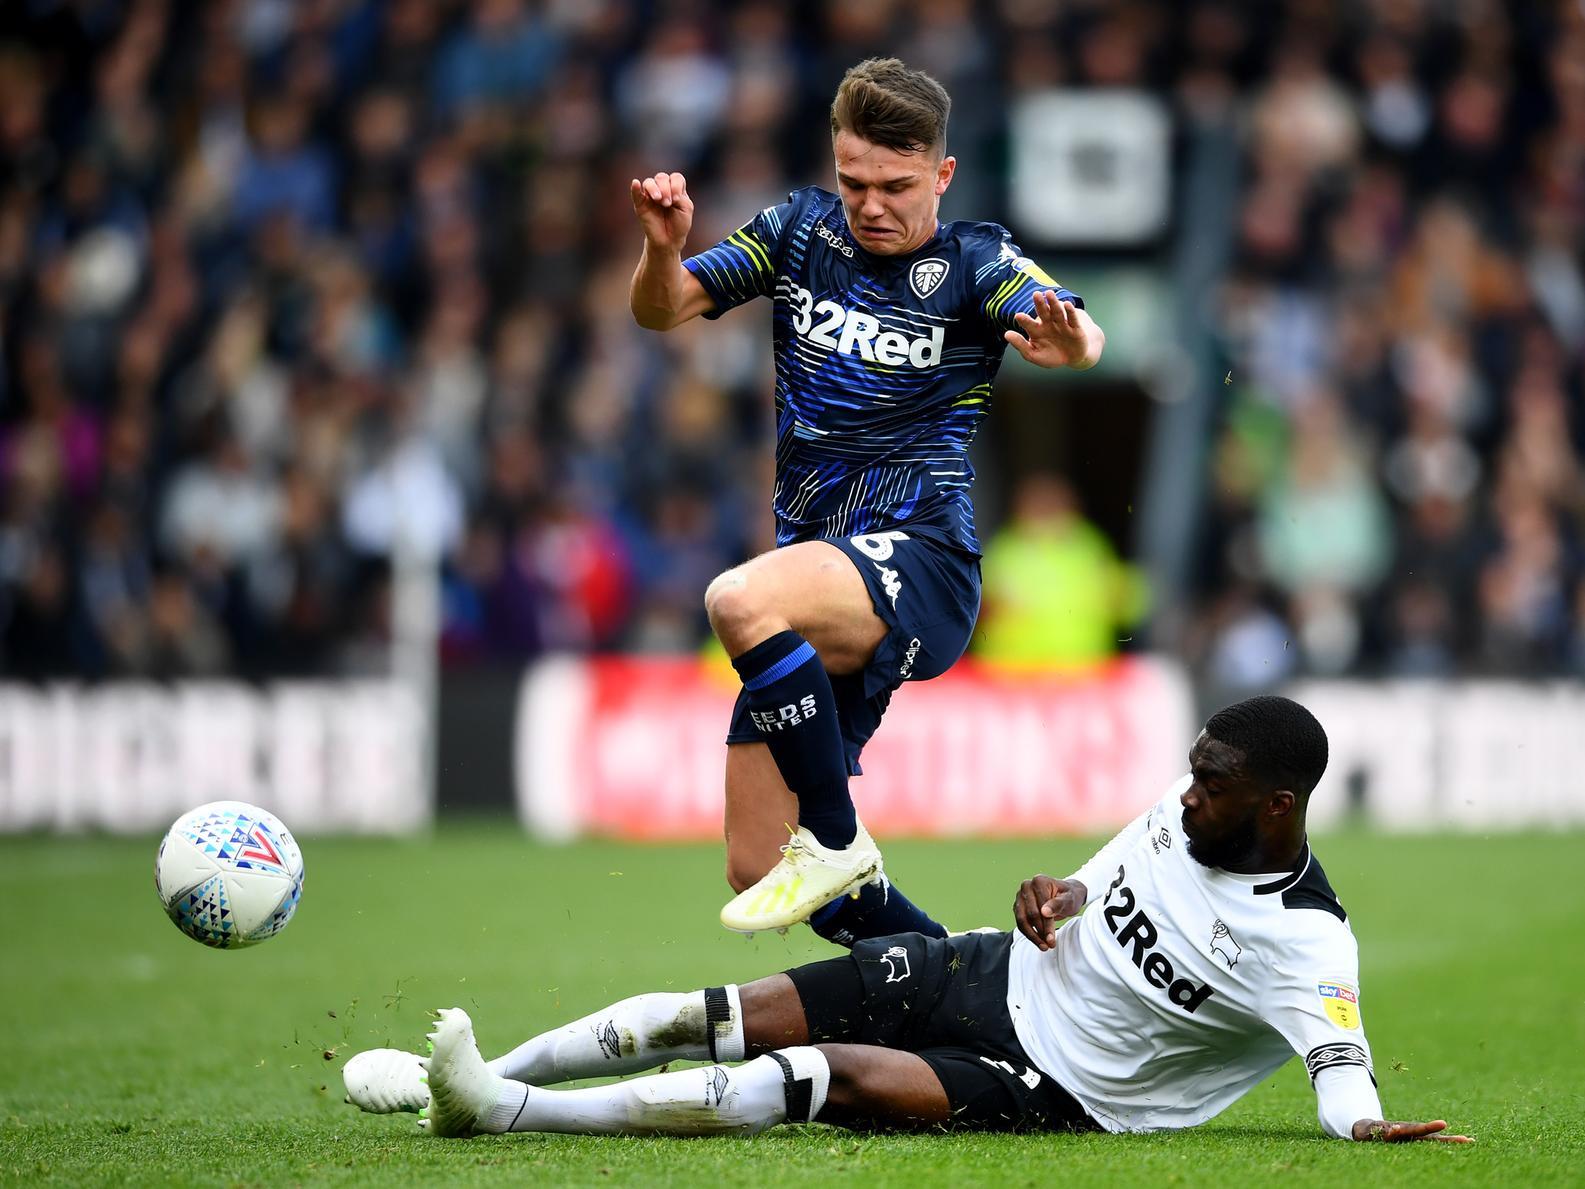 The agile midfielder is integral to Leeds' intricate style of play, and has turned into a bit of an assist machine too. He's recently into a new five-year deal, and appears to be at the club for the long haul.